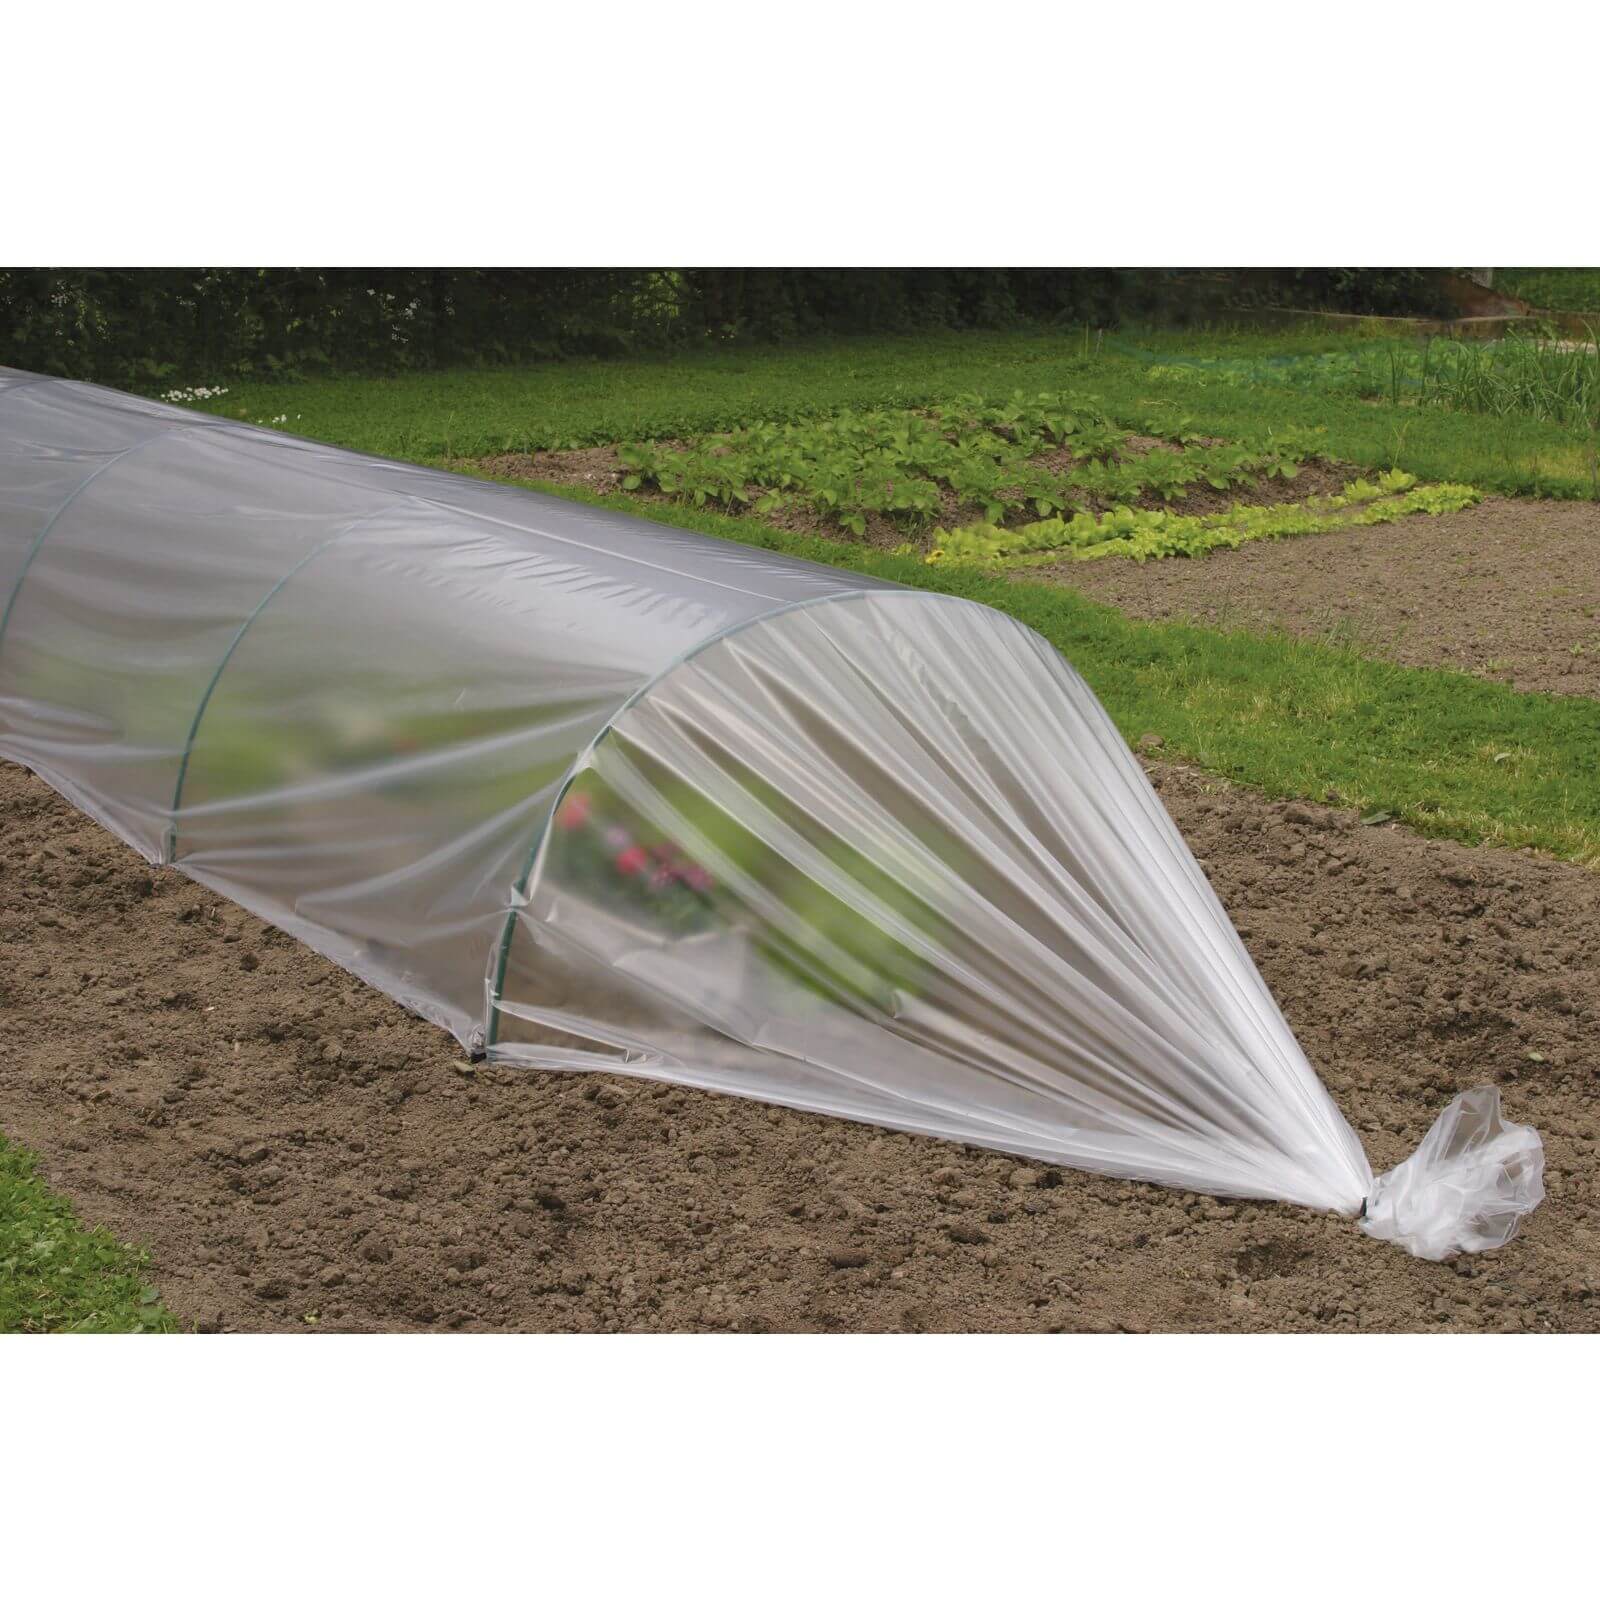 Sprout Garden Grow Polytunnel Kit - 1m x 2m